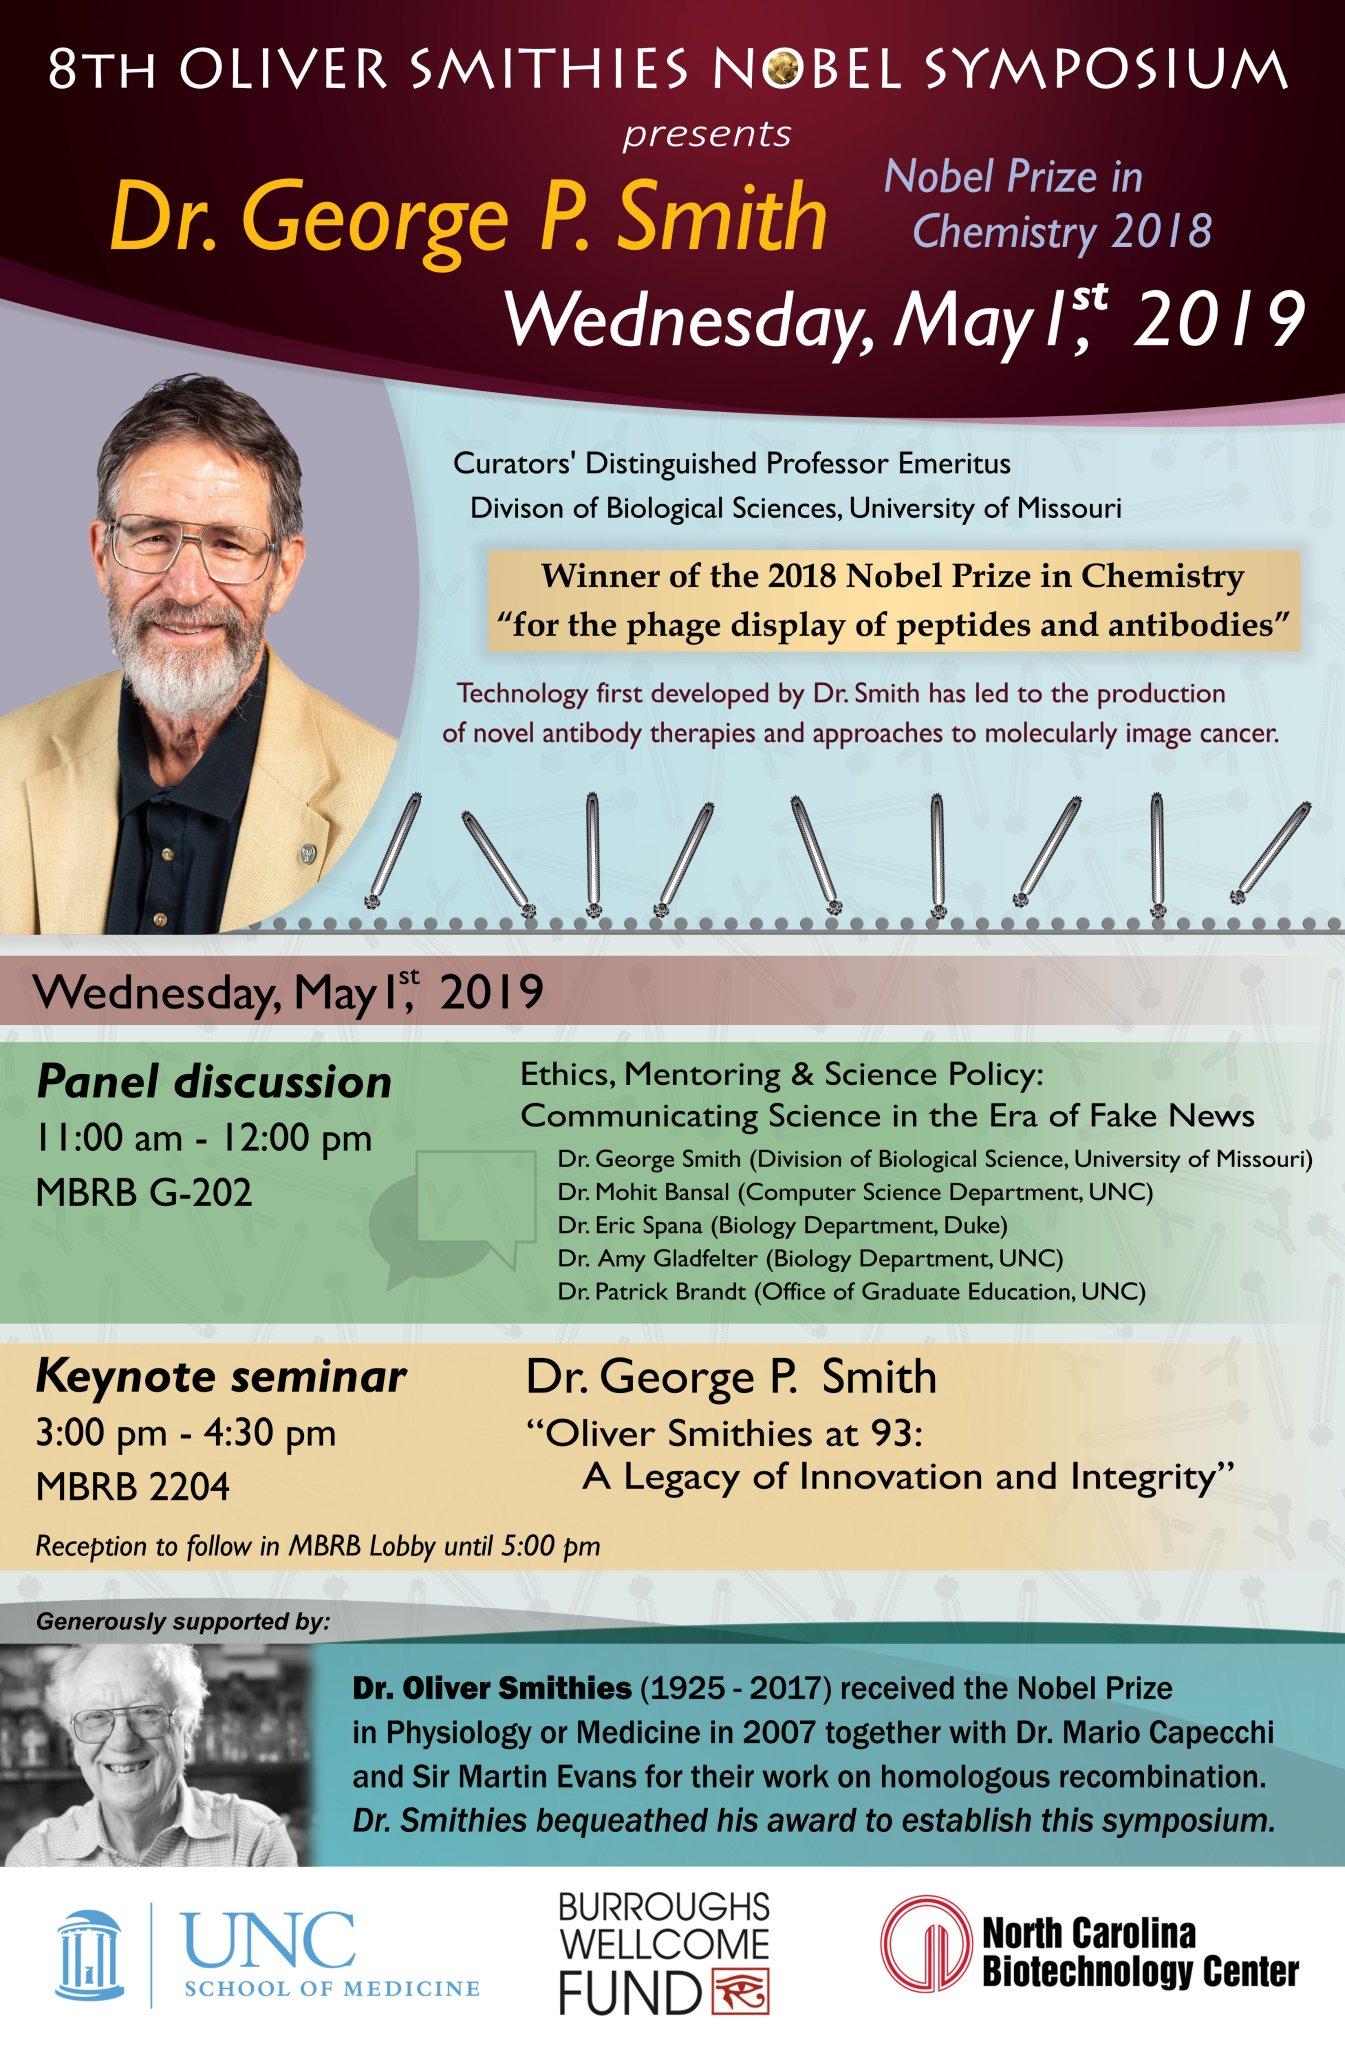 flier announcement of Dr. George P. Smith talks at UNC on May 1 2019 11am and 3 pm in MBRB